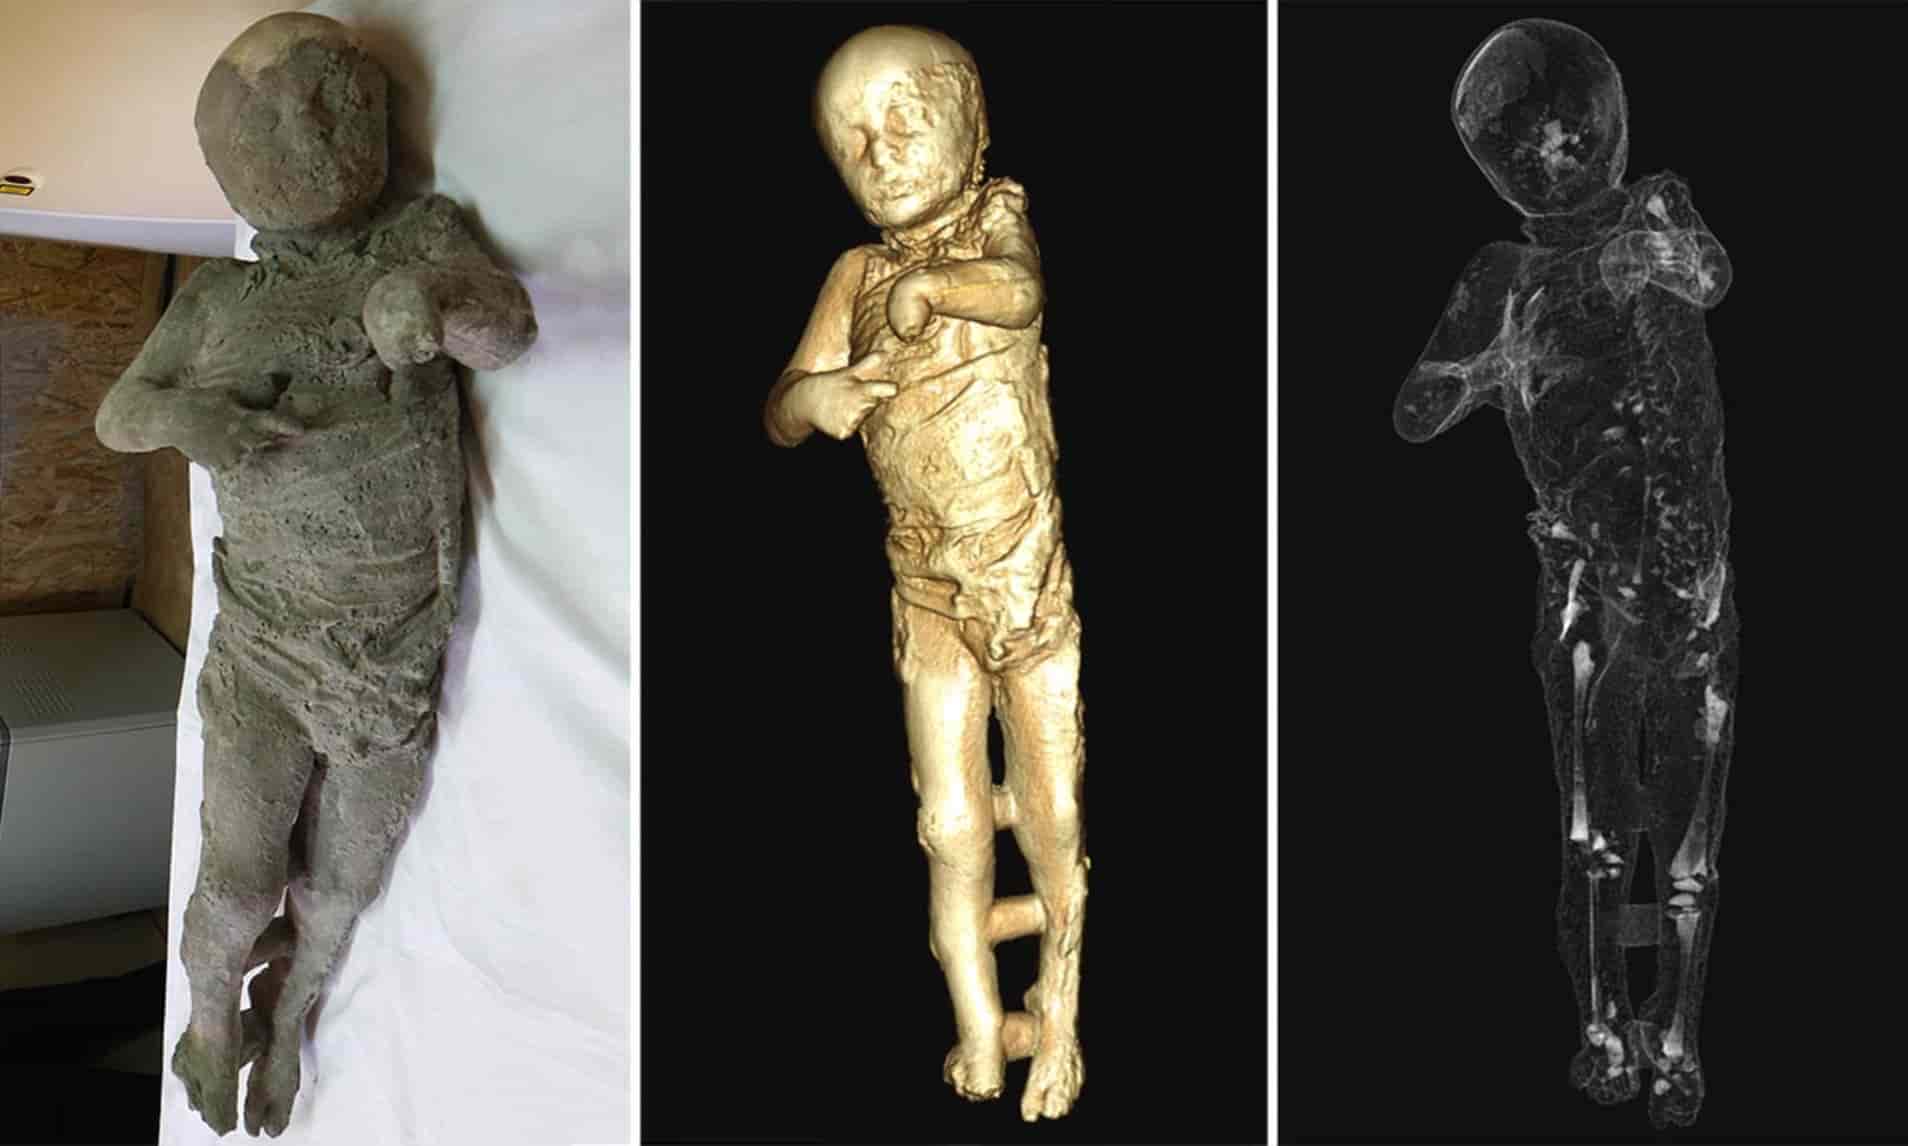 New insights of Pompeii victims revealed through CT Scans